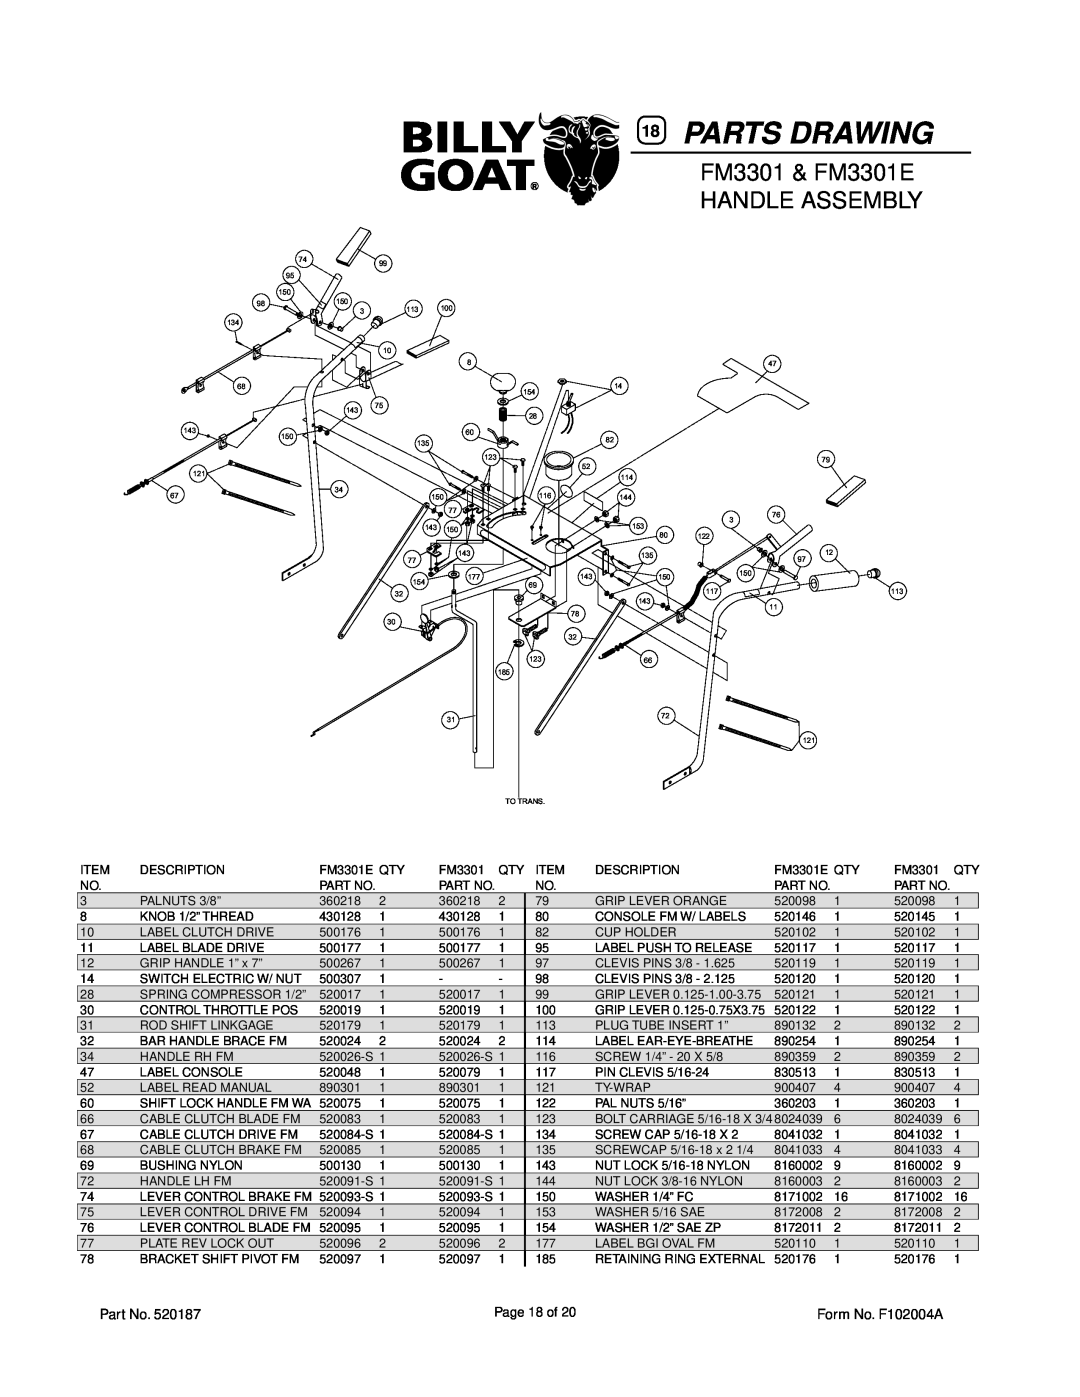 Billy Goat owner manual Parts Drawing, FM3301 & FM3301E, Handle Assembly 